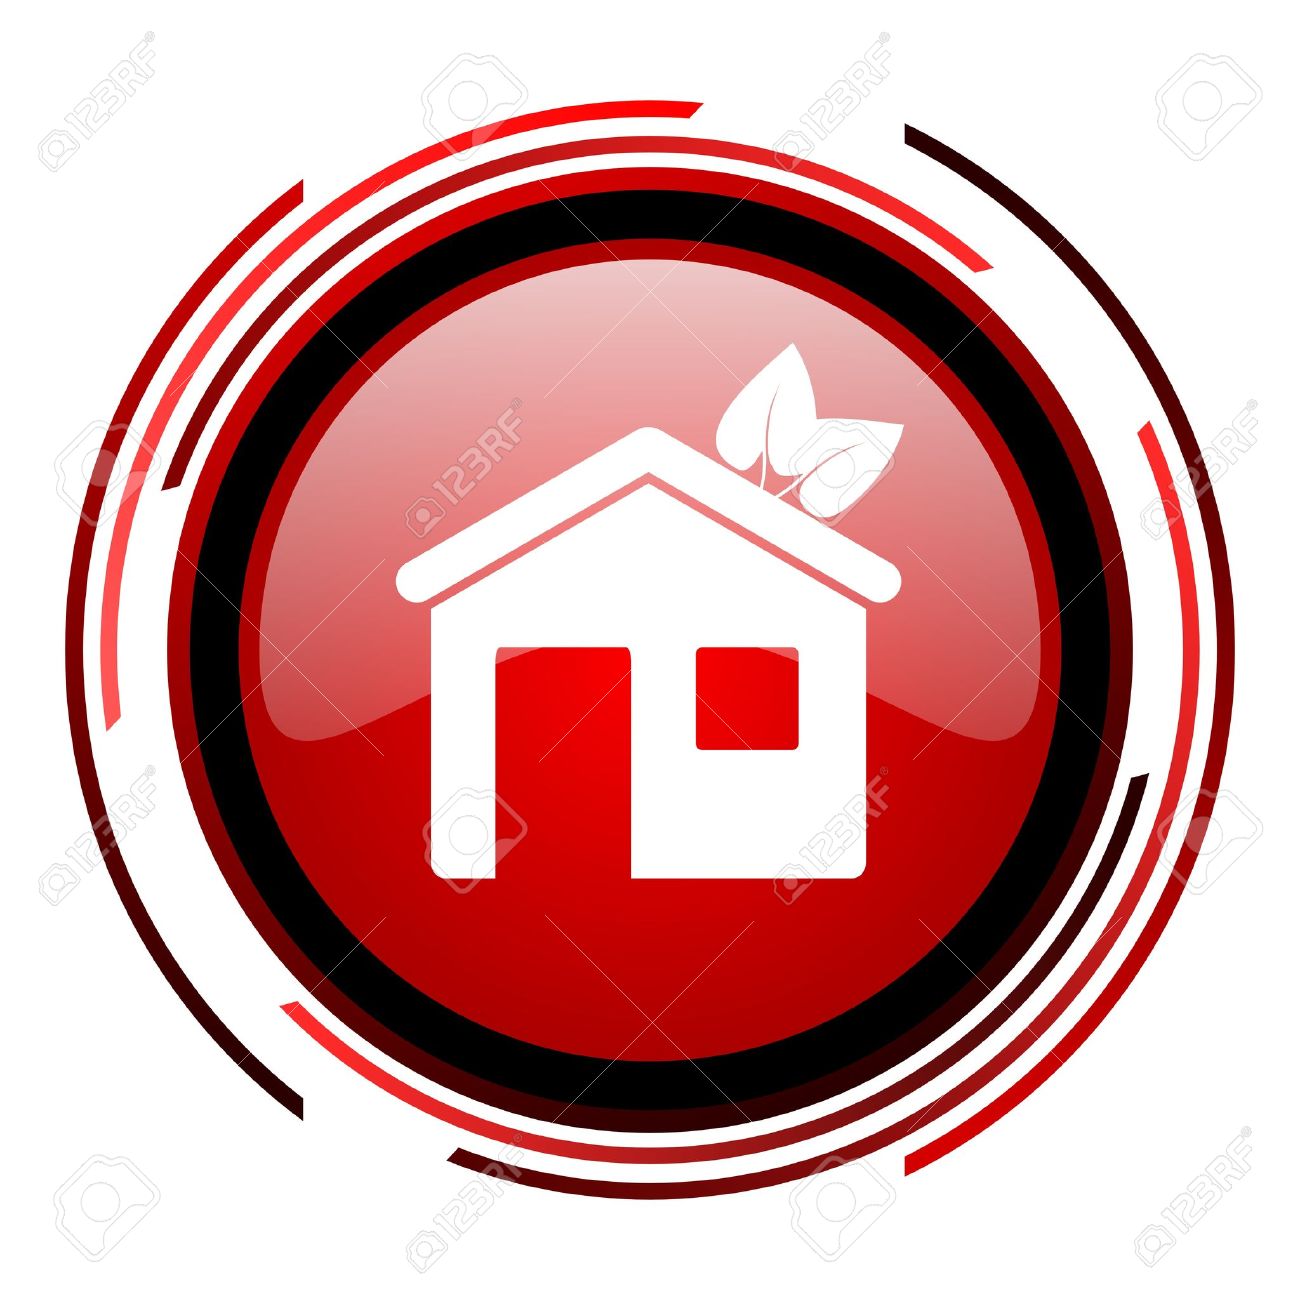 19640686-home-red-circle-web-glossy-icon-on-white-background--Stock-Photo.jpg